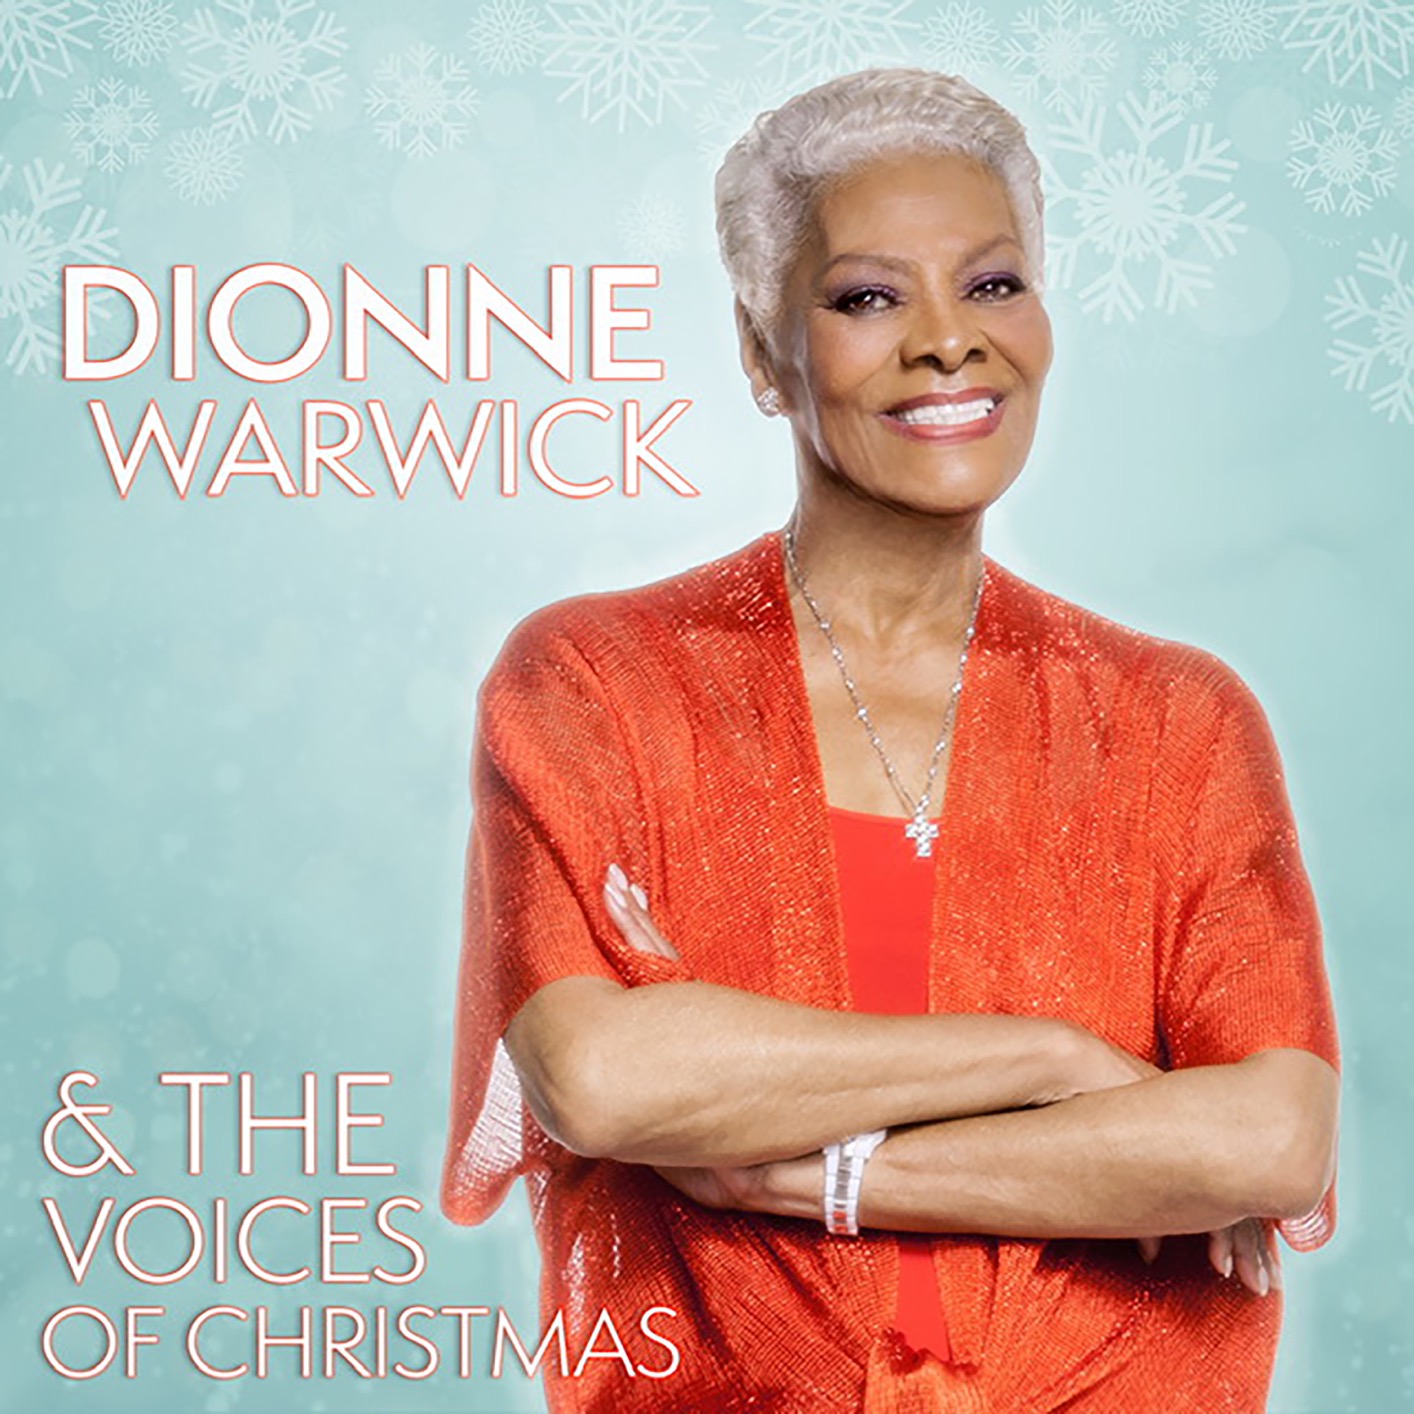 Dionne Warwick - Dionne Warwick & The Voices of Christmas (2019) [FLAC 24bit/48kHz]